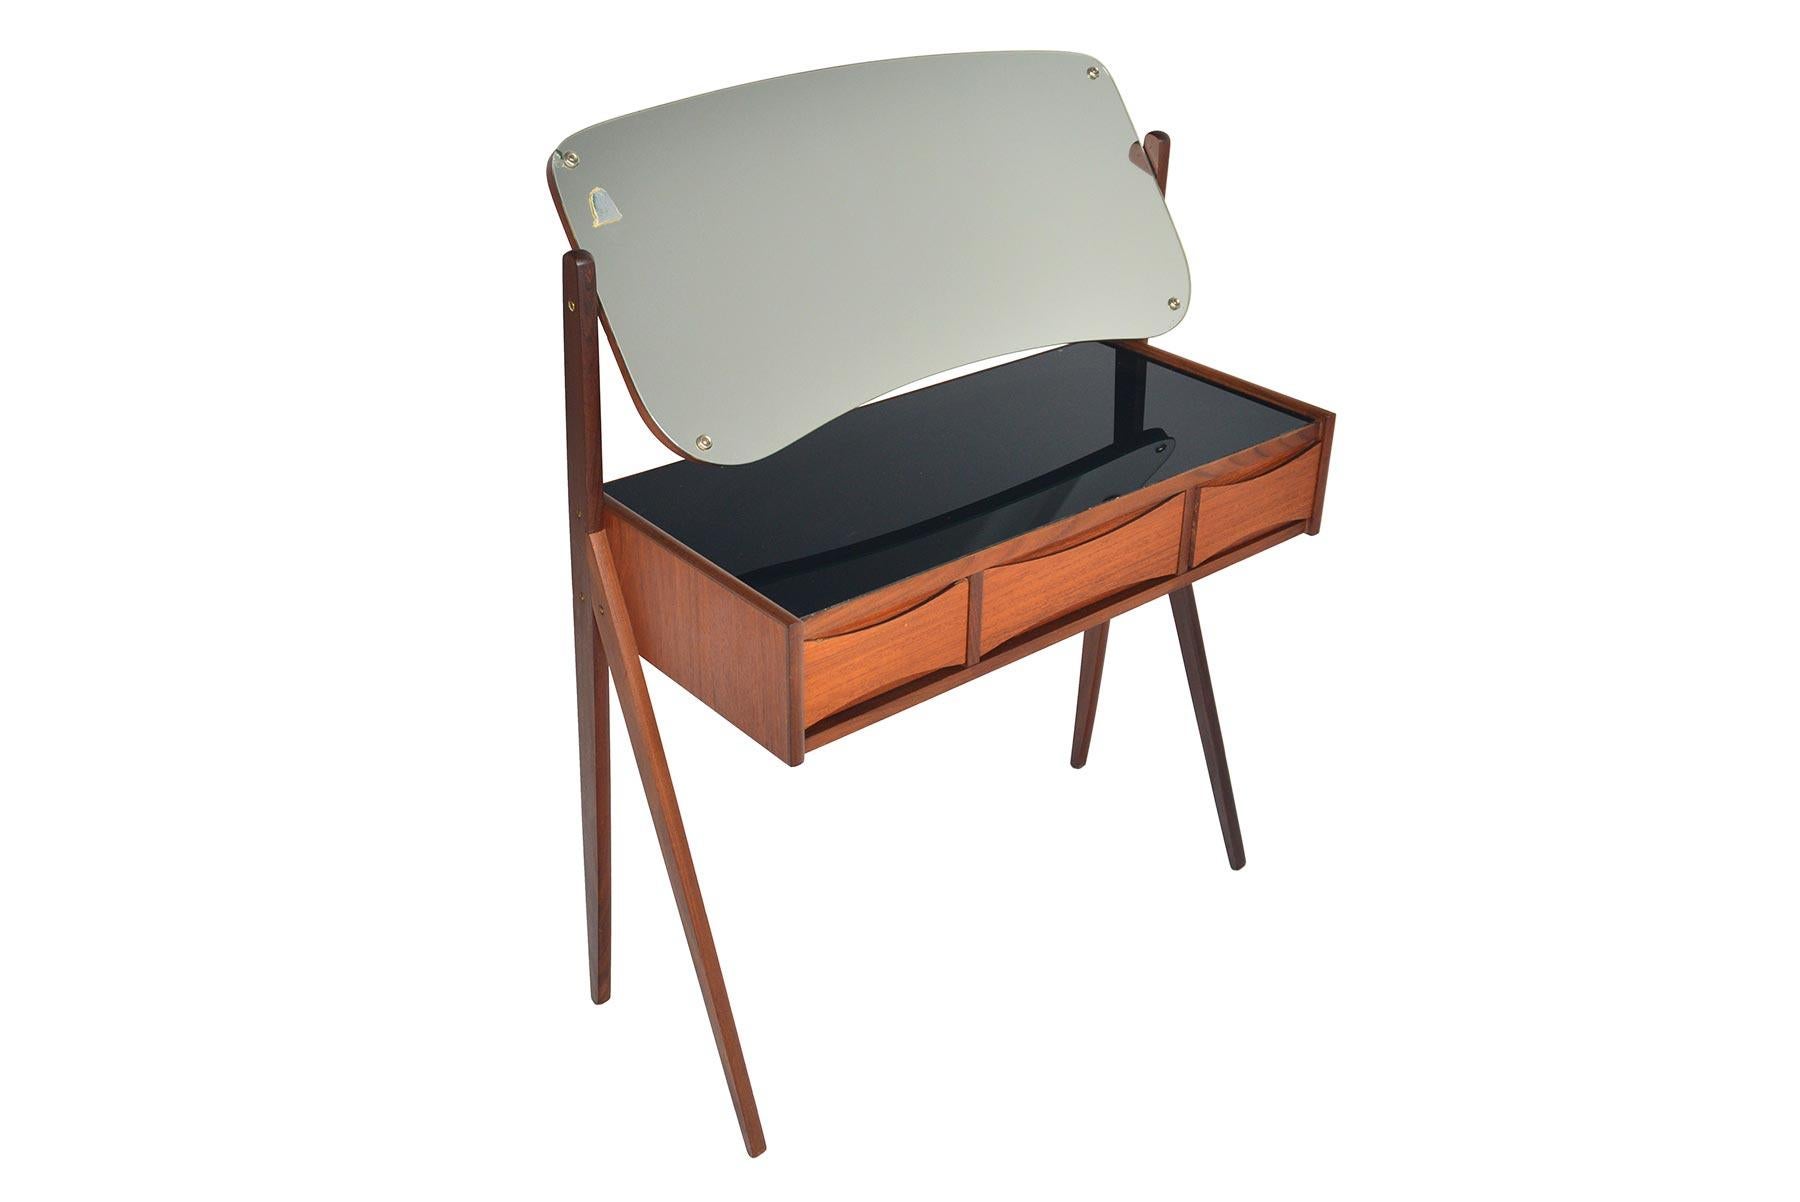 This gorgeous Danish modern Arne Vodder teak V-legged vanity offers wonderful lines in a small footprint! Featuring an articulating vanity mirror, this piece has ample storage with three drawers and a black glass, lined top. In excellent original